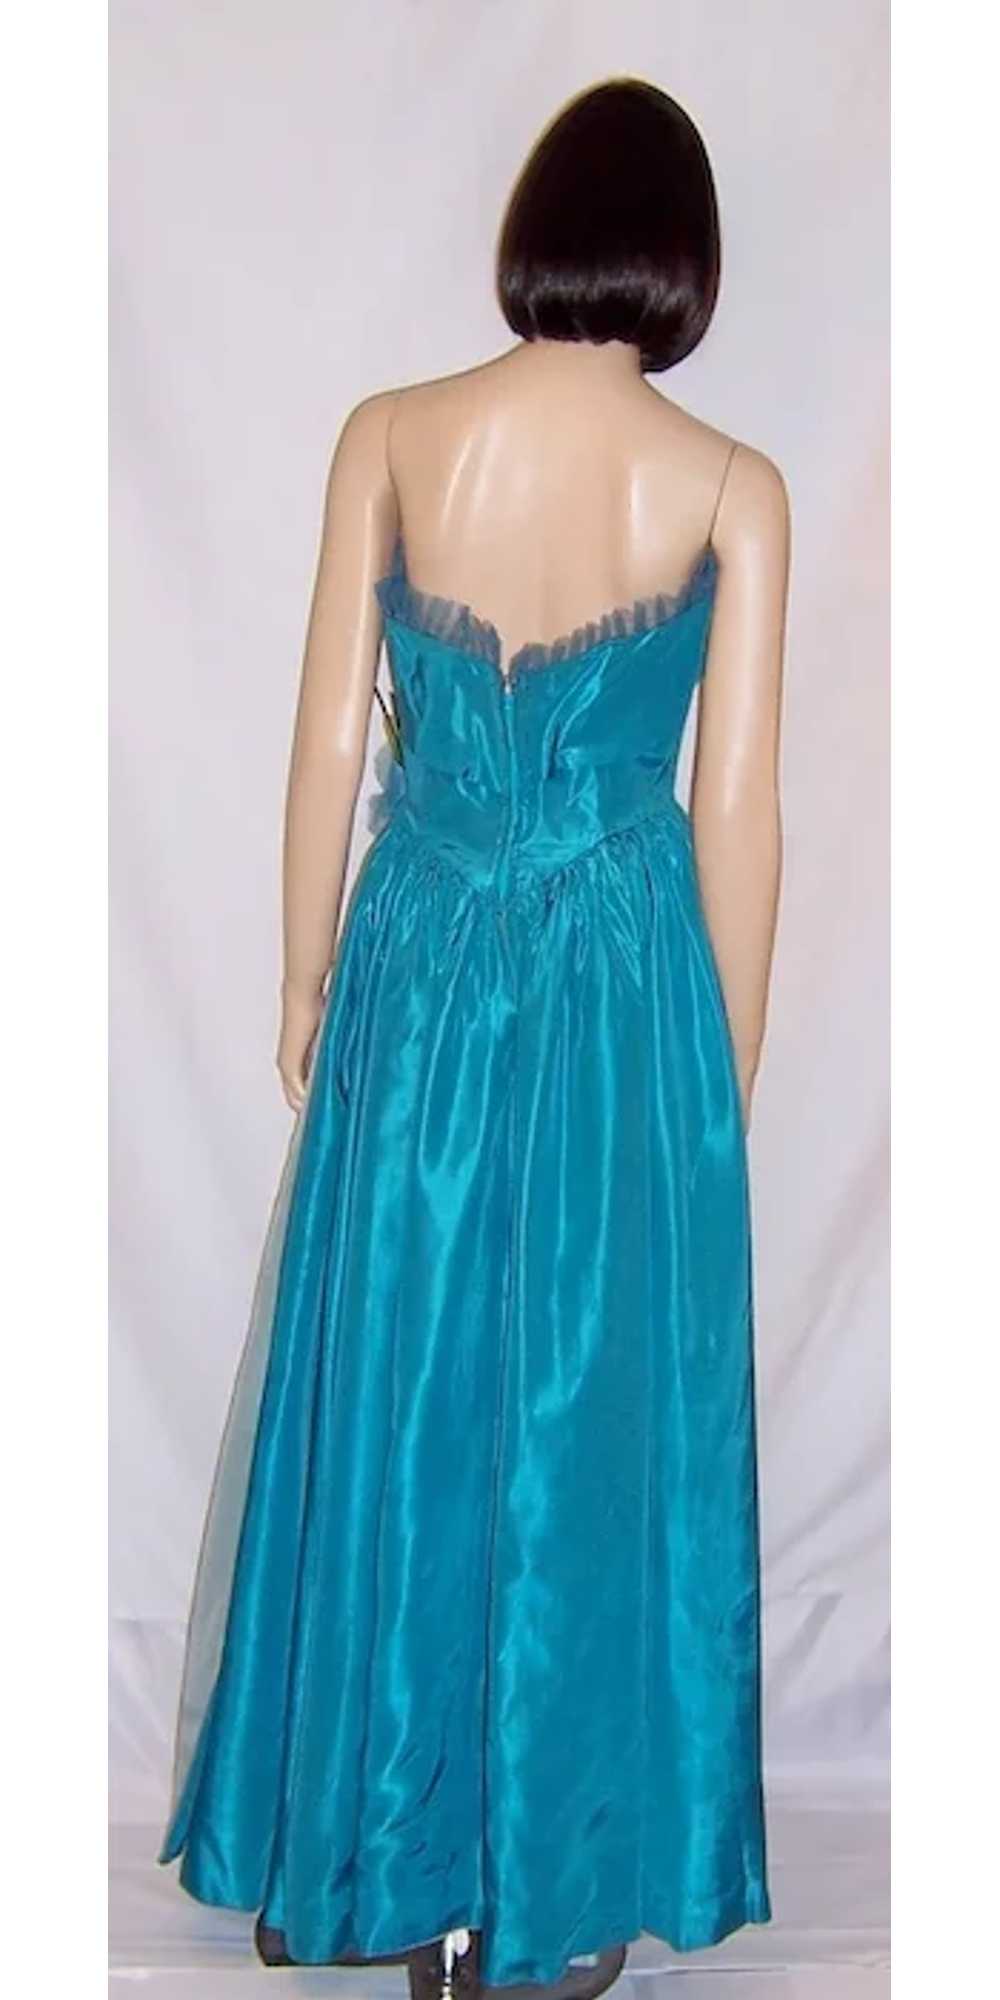 Two-Toned Turquoise Taffeta Strapless Gown - image 4